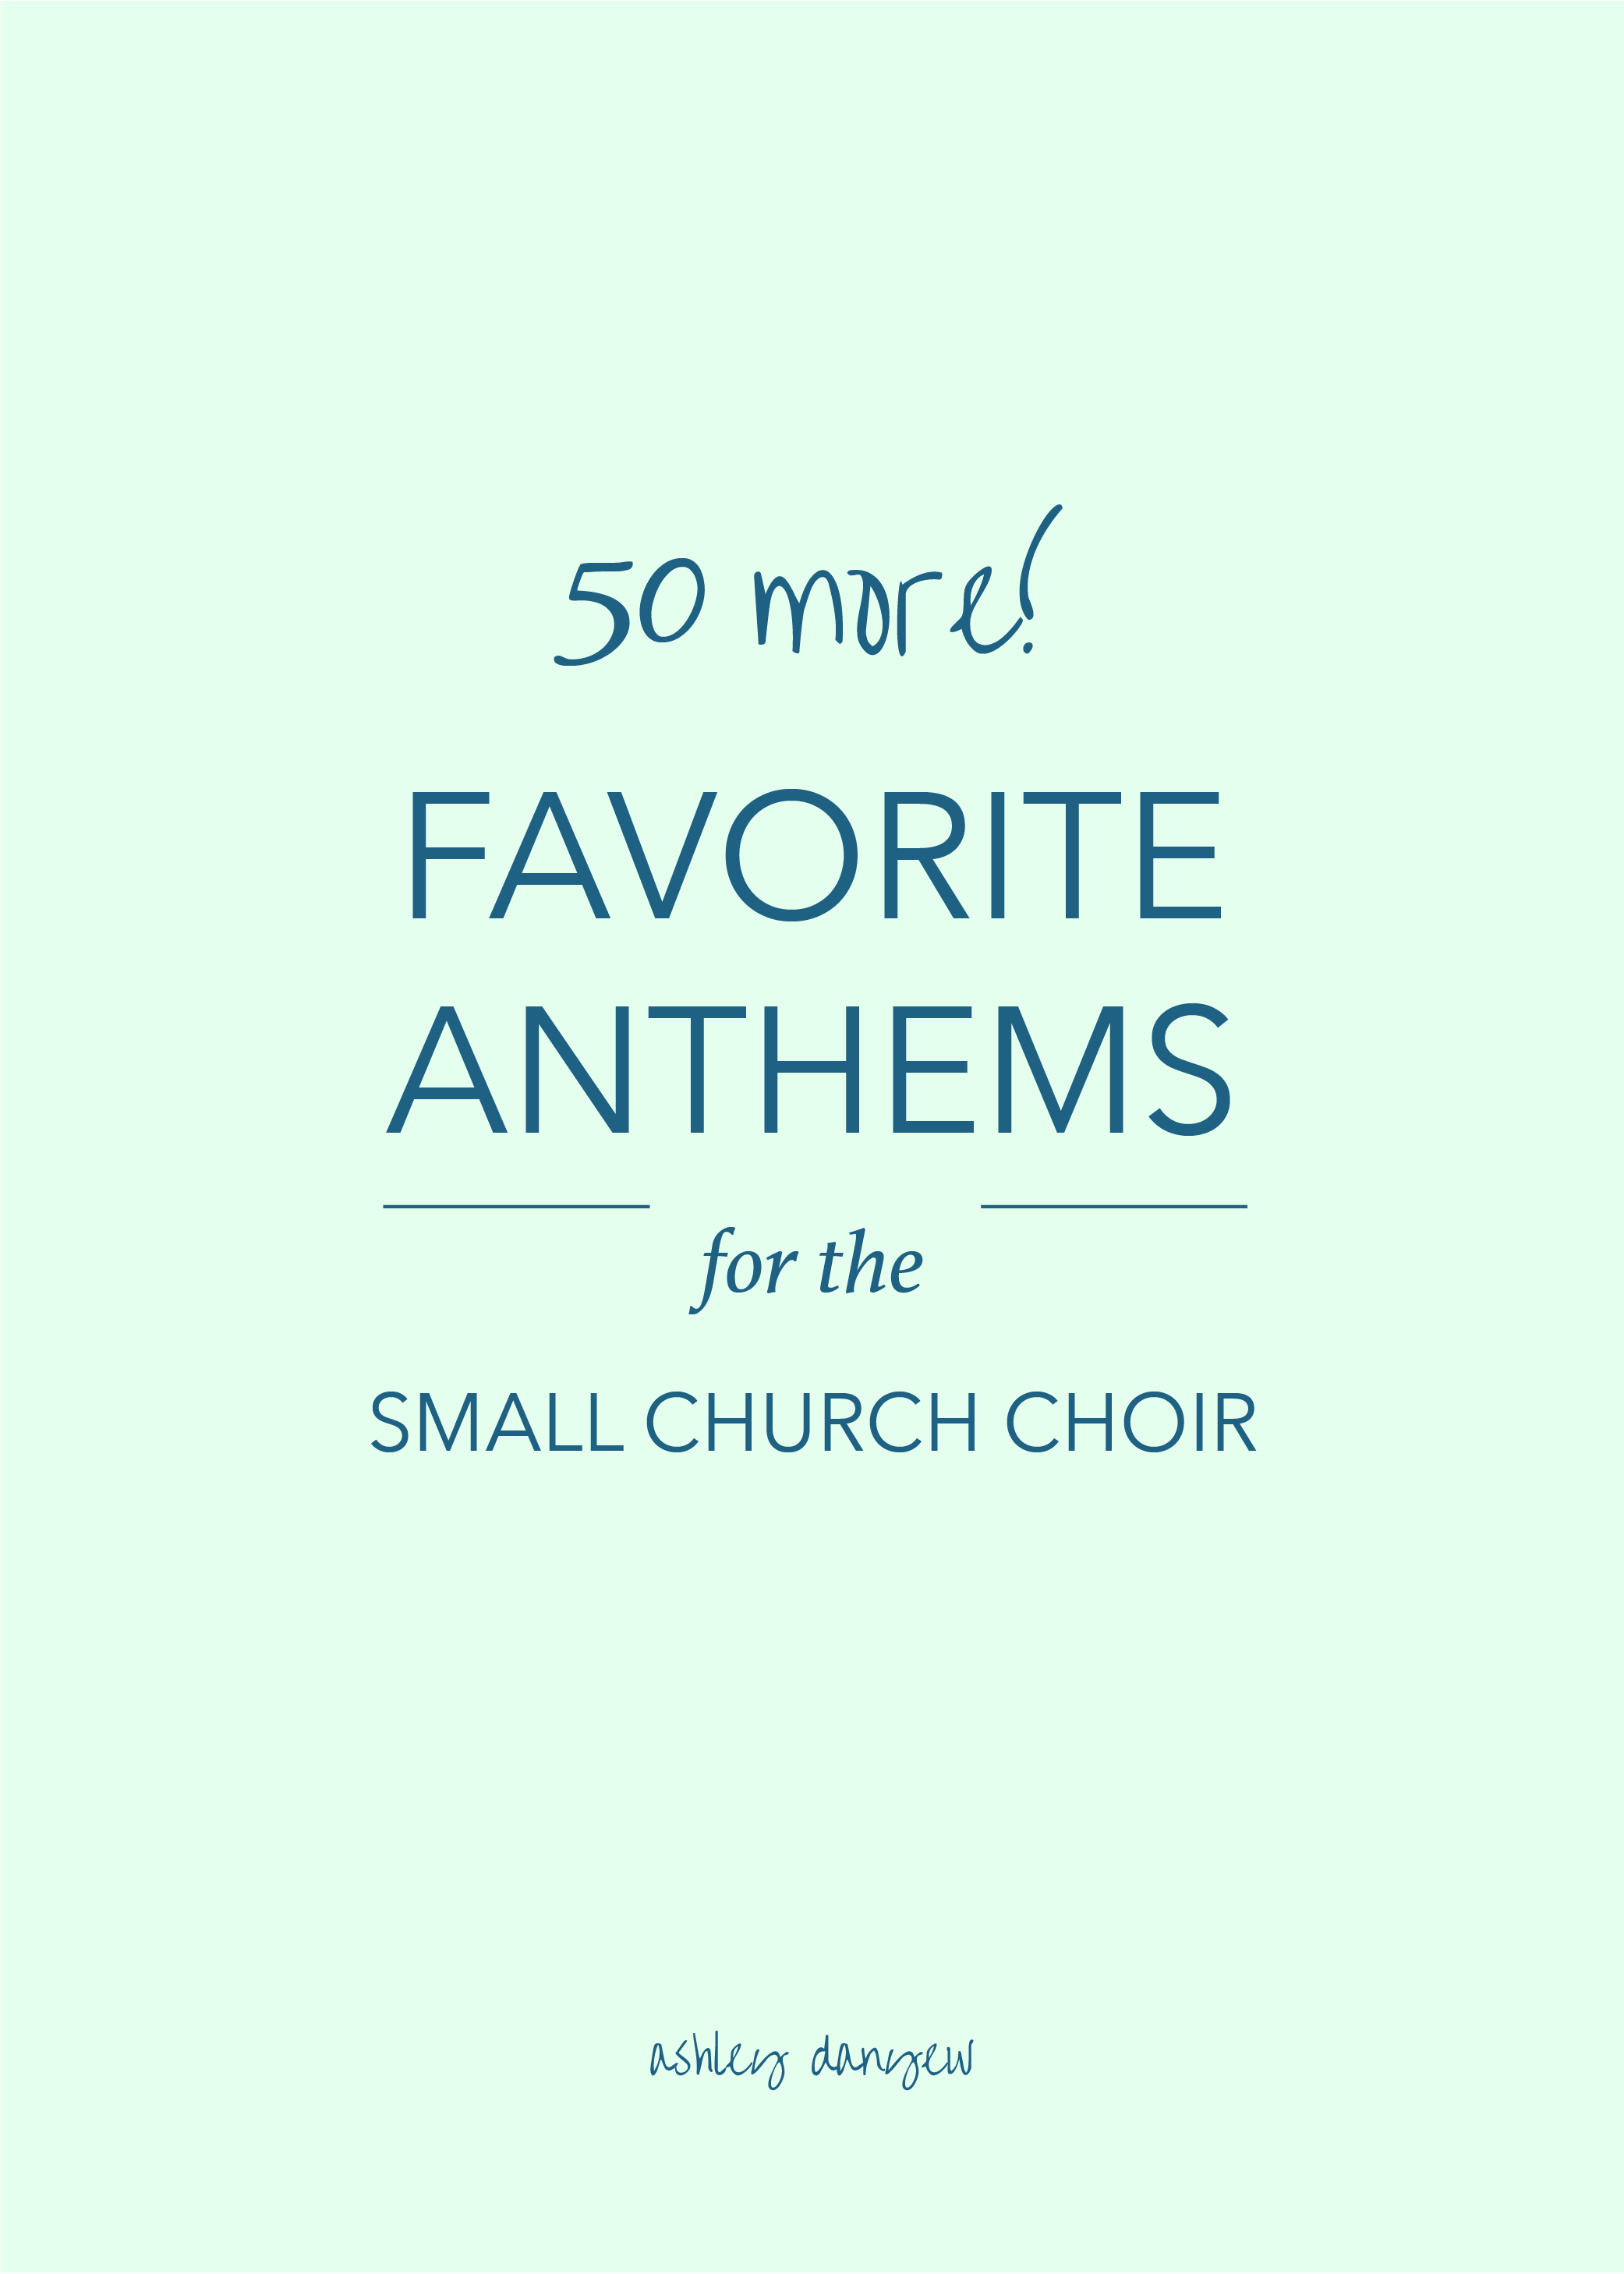 50 More Favorite Anthems for the Small Church Choir-01.png